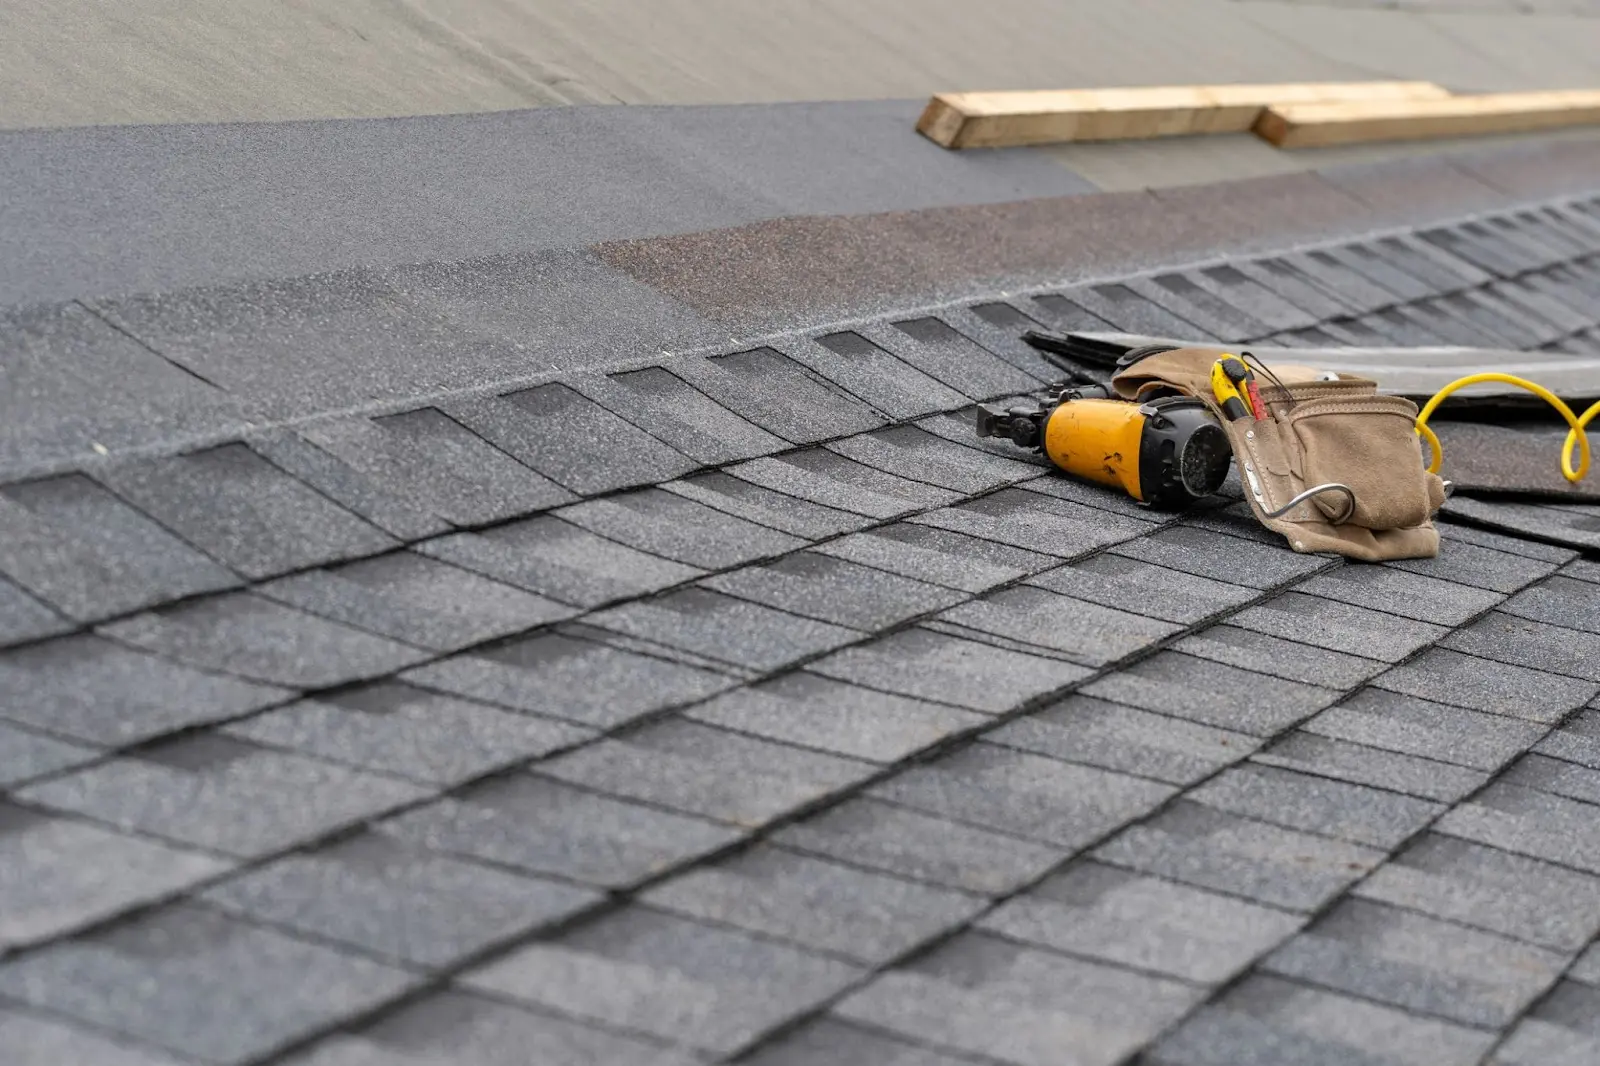 Alfreds Roofing is a local roofing contractor specializing in asphalt shingle roof installation.